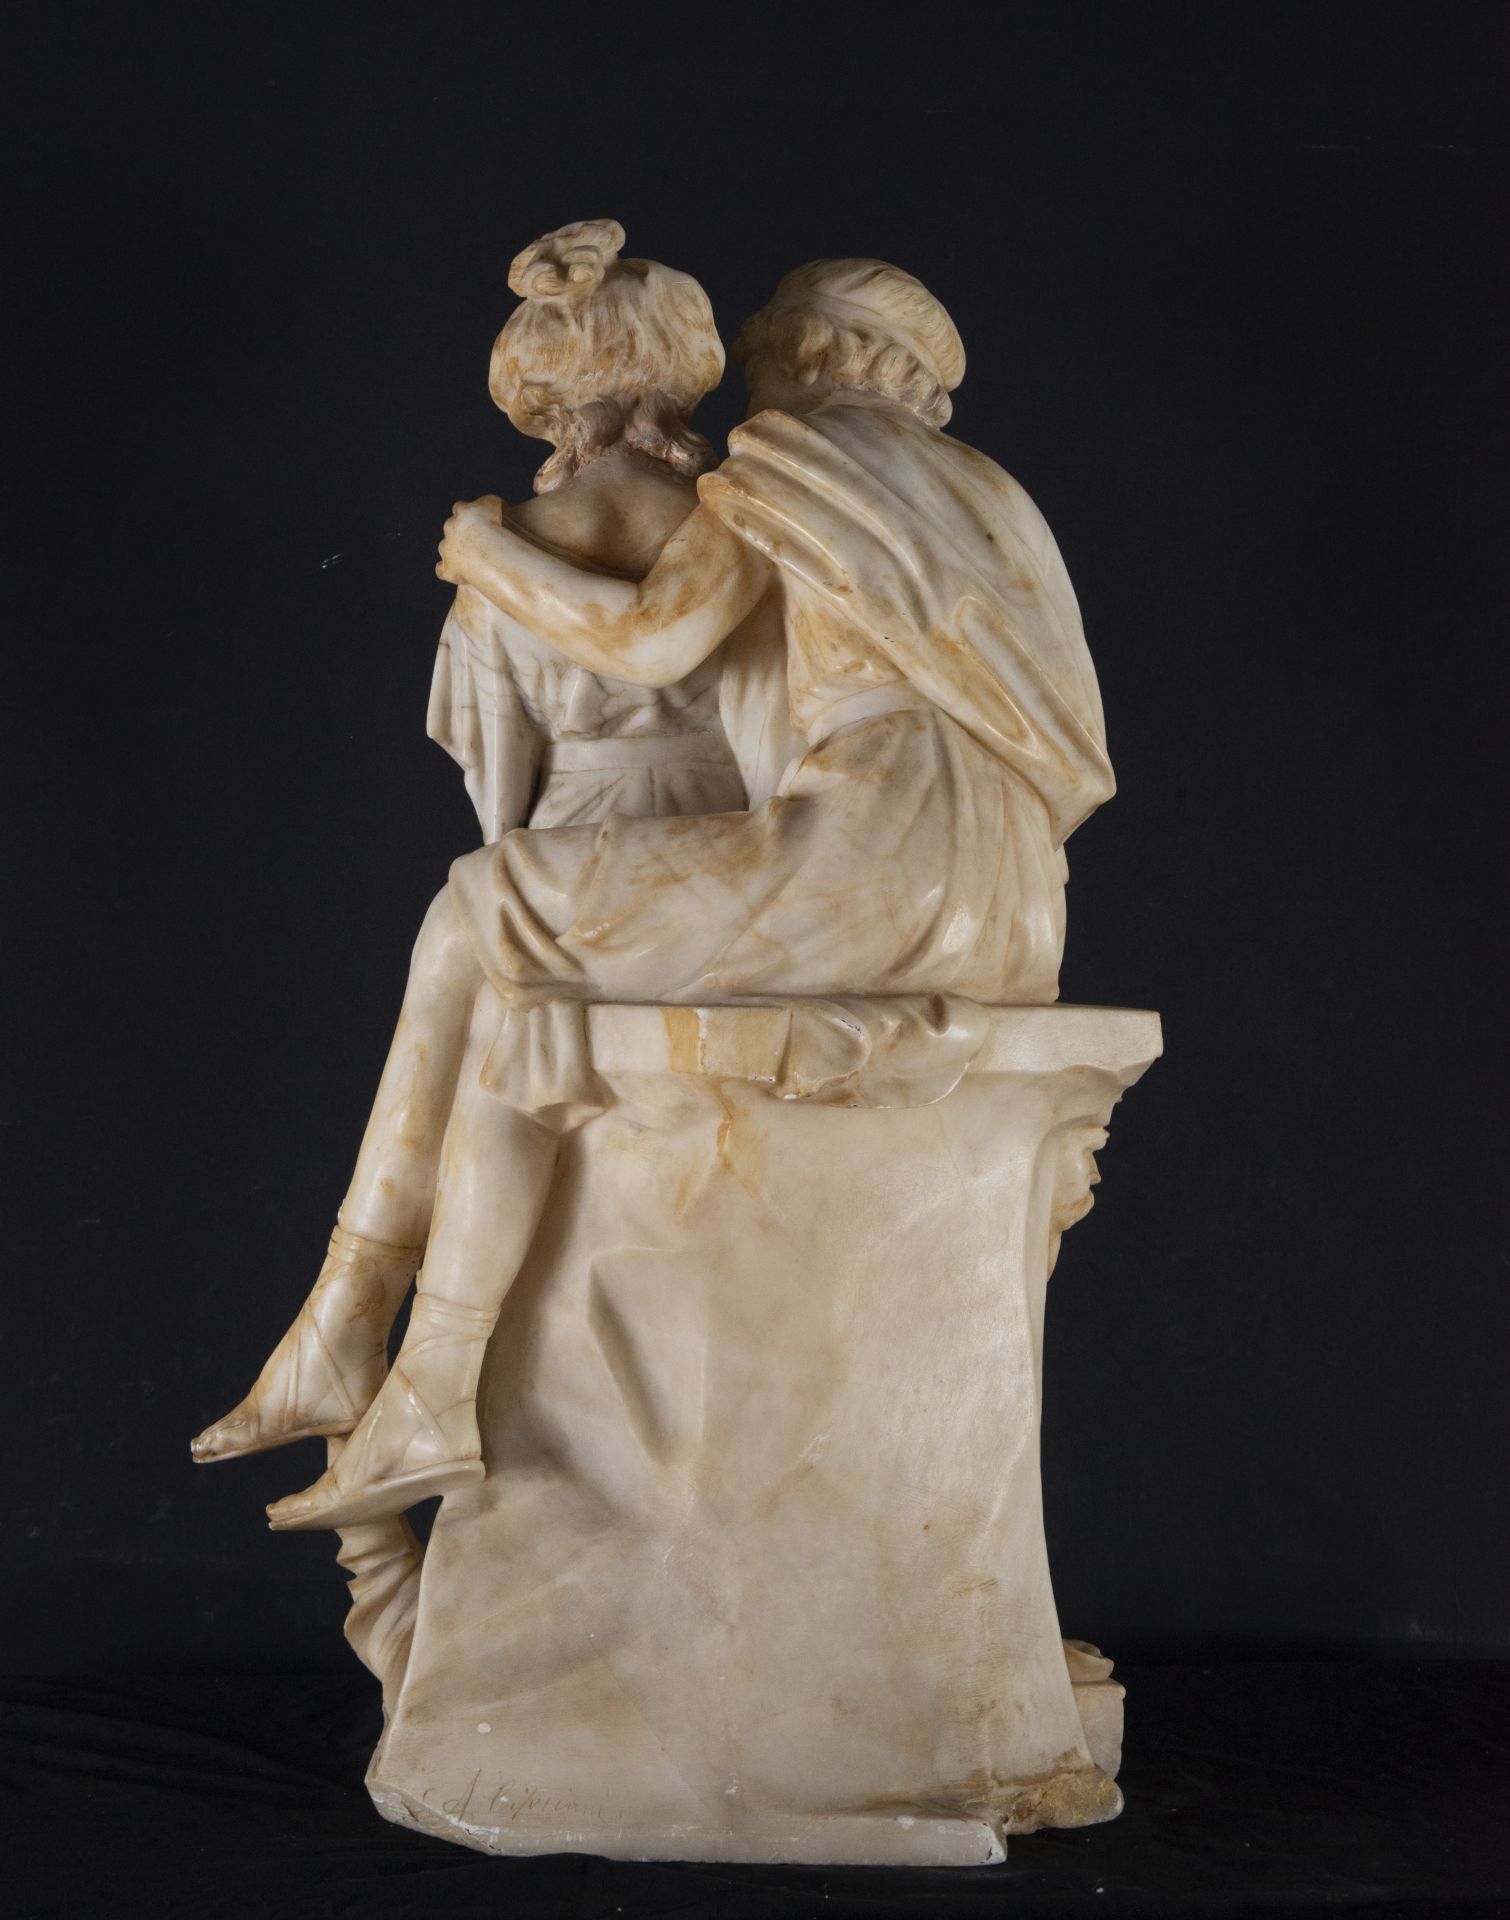 Important Great Couple of Lovers in Alabaster, Adolfo Cipriani, Italy (1880 - 1930), 19th century It - Image 4 of 4